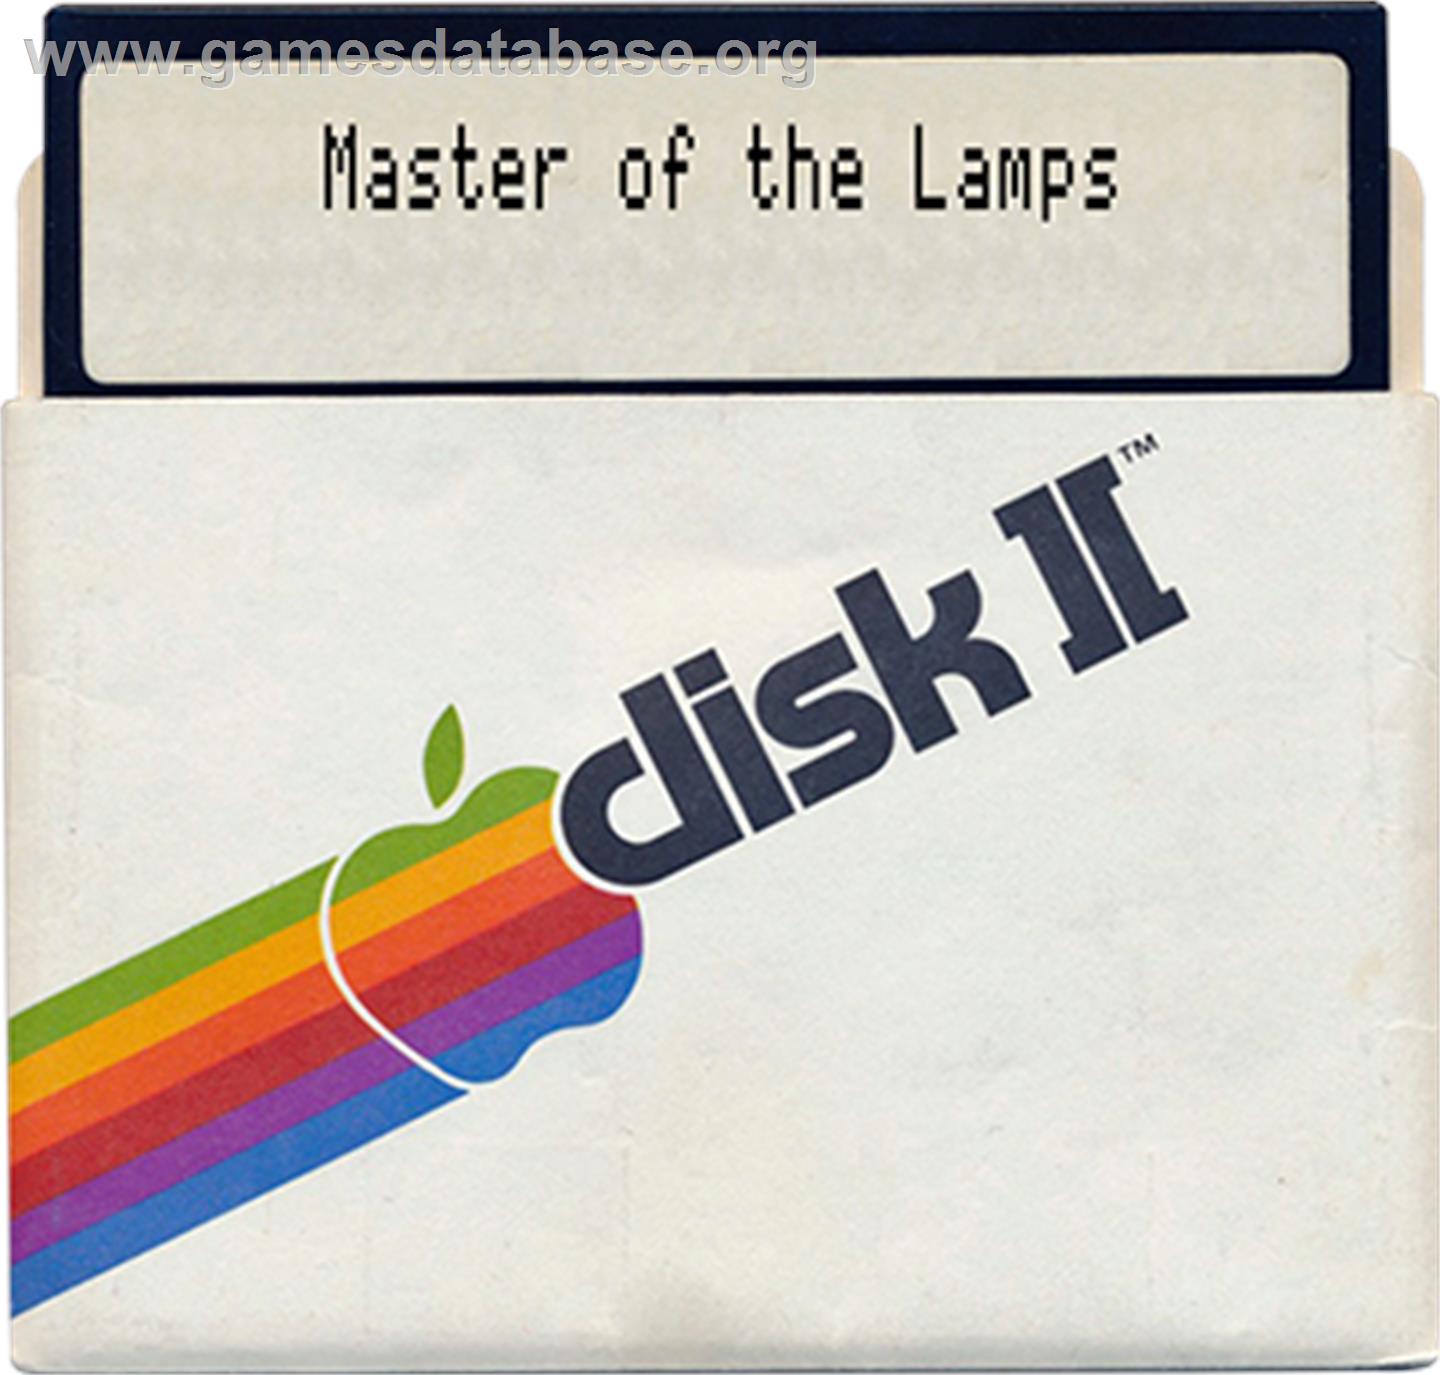 Master of the Lamps - Apple II - Artwork - Disc